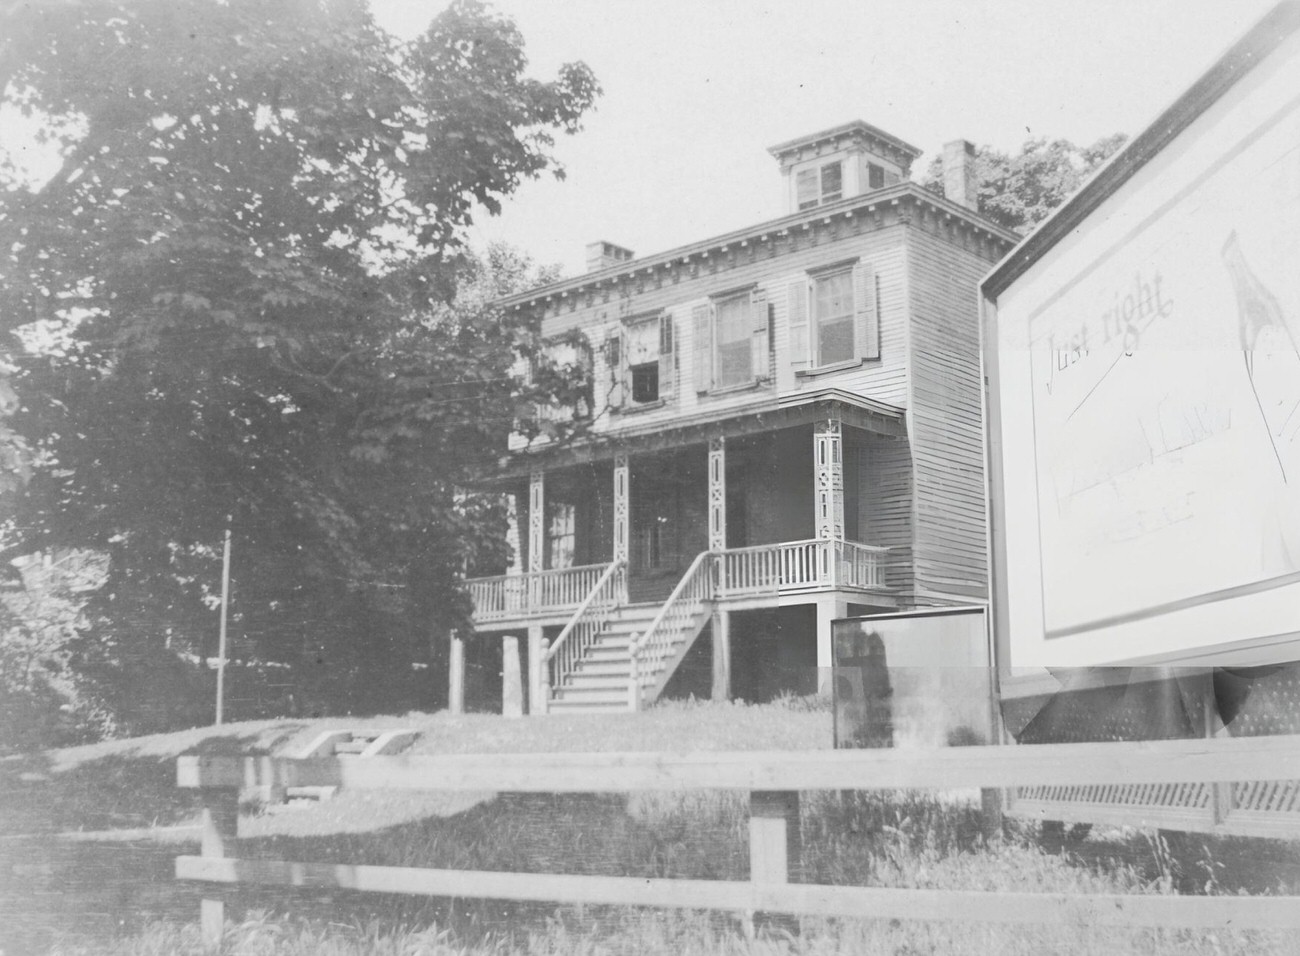 White Residence And Old House On Kingsbridge Avenue, Bronx, May 1925.